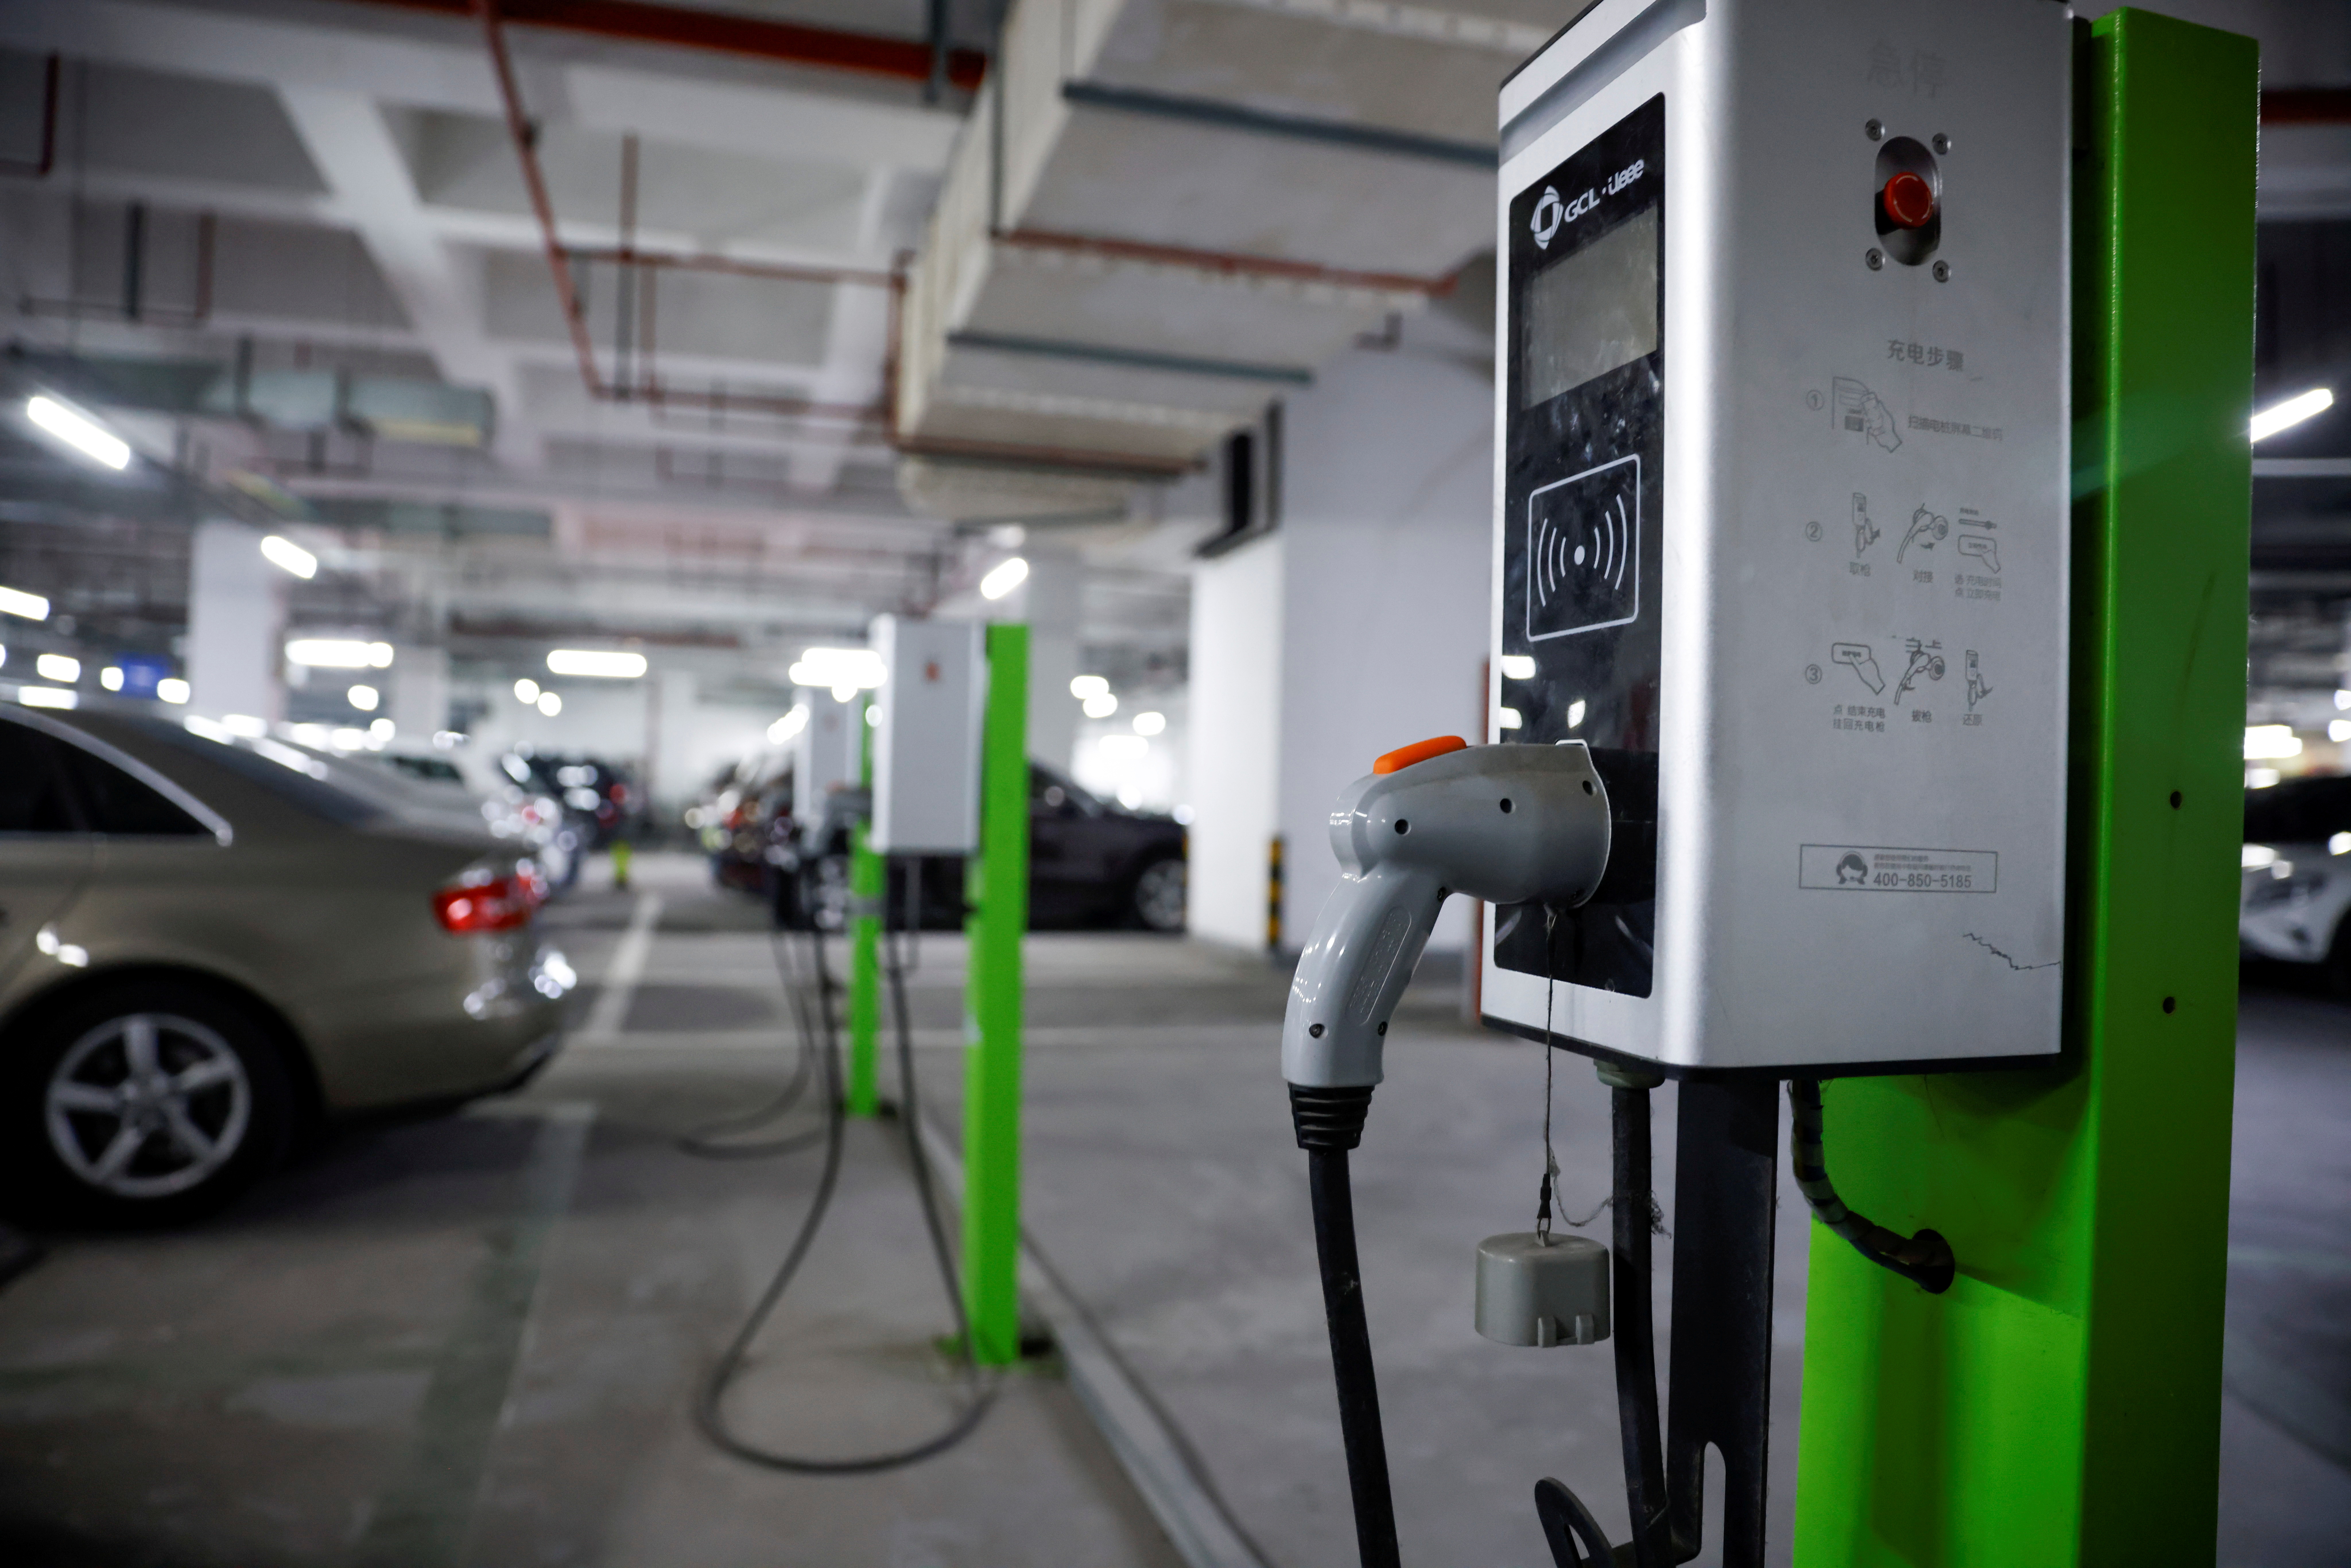 A electric car charging station is pictured in a parking lot in Shanghai, China March 13, 2021. REUTERS/Aly Song/File Photo